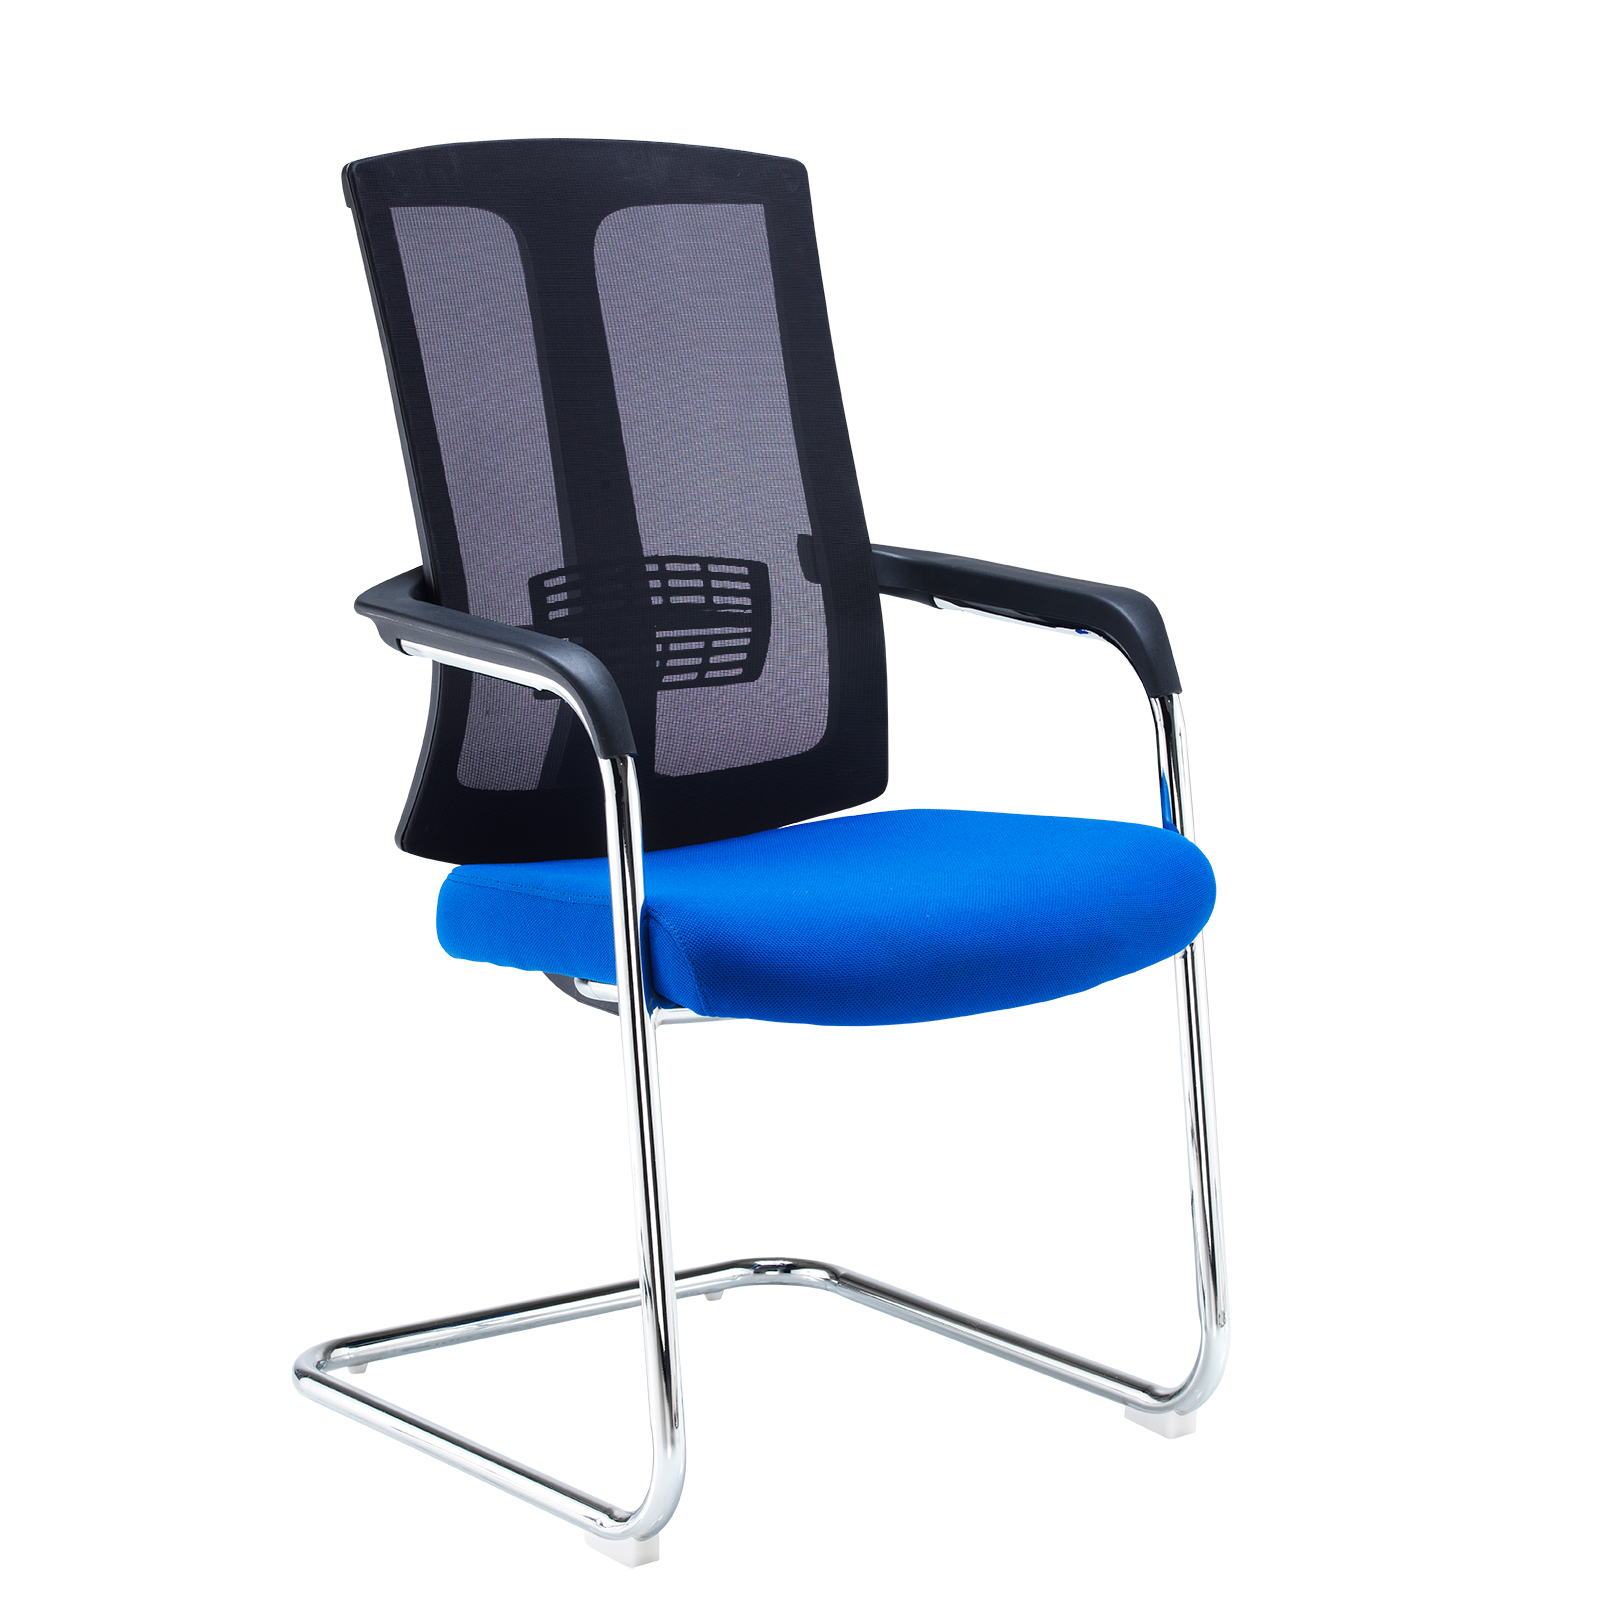 Ronan chrome cantilever frame conference chair with mesh back - blue